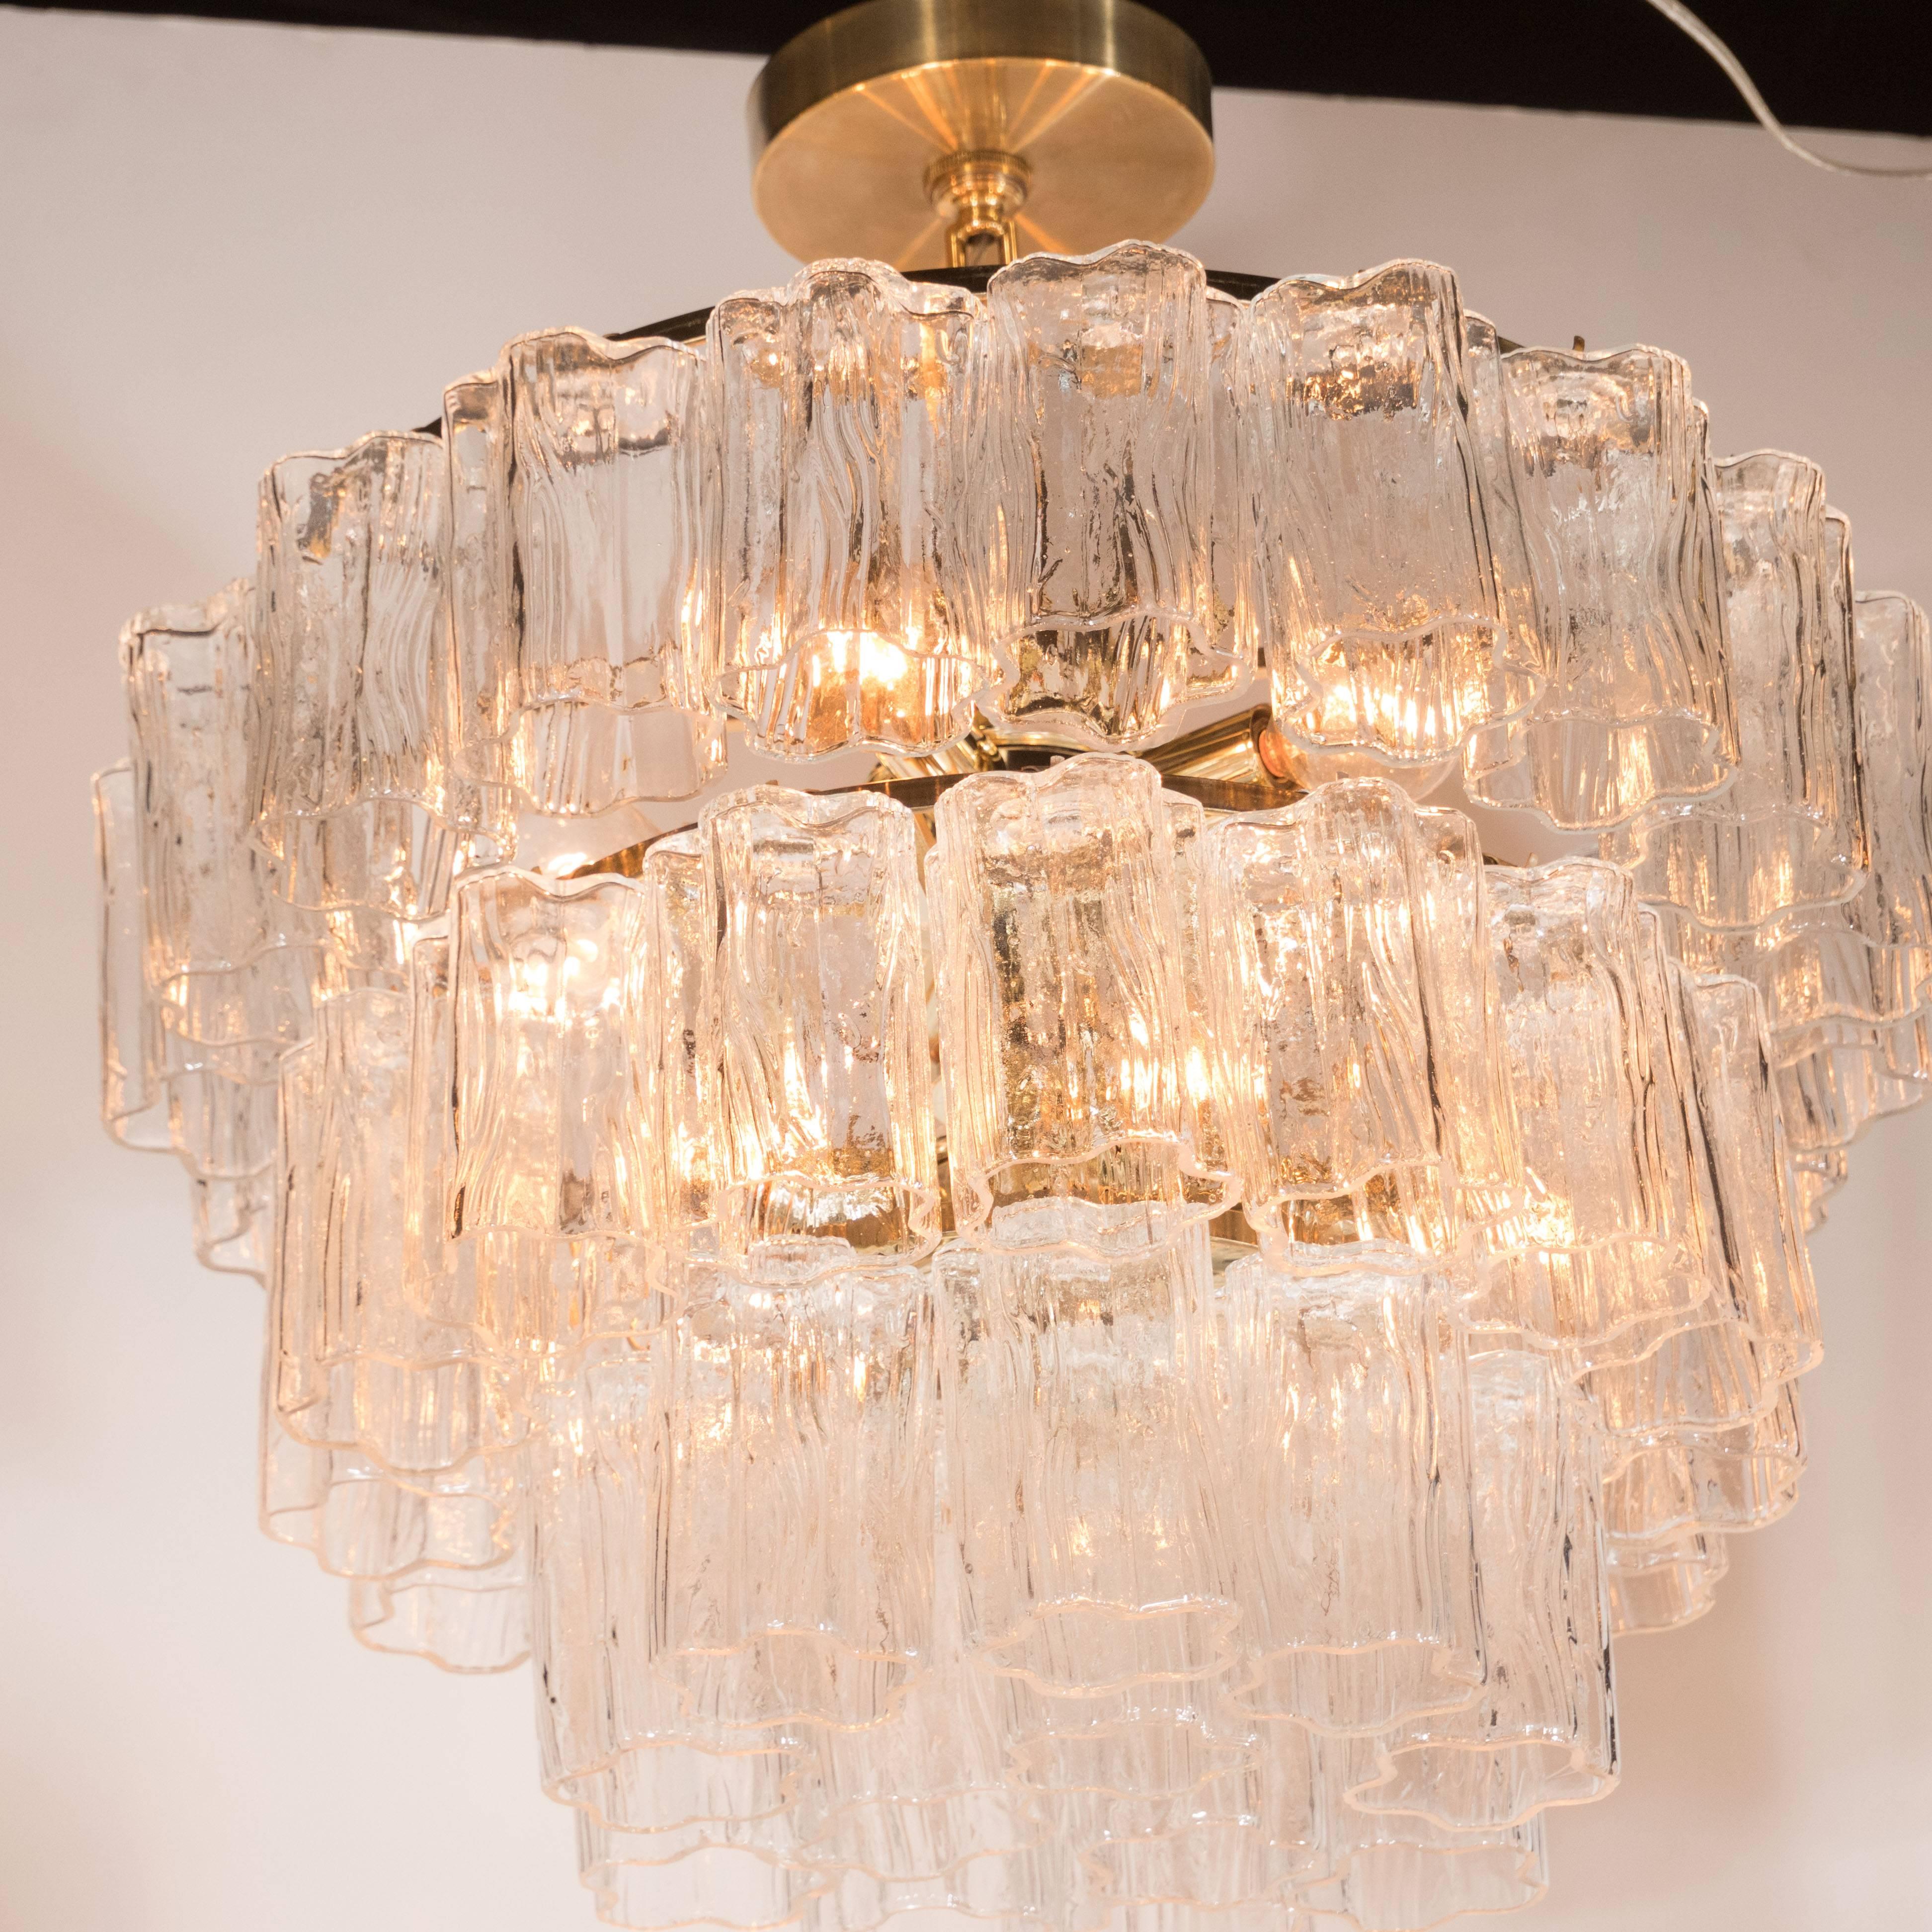 Late 20th Century Mid-Century Modernist Three-Tier Murano Tronchi Chandelier with Brass Fittings